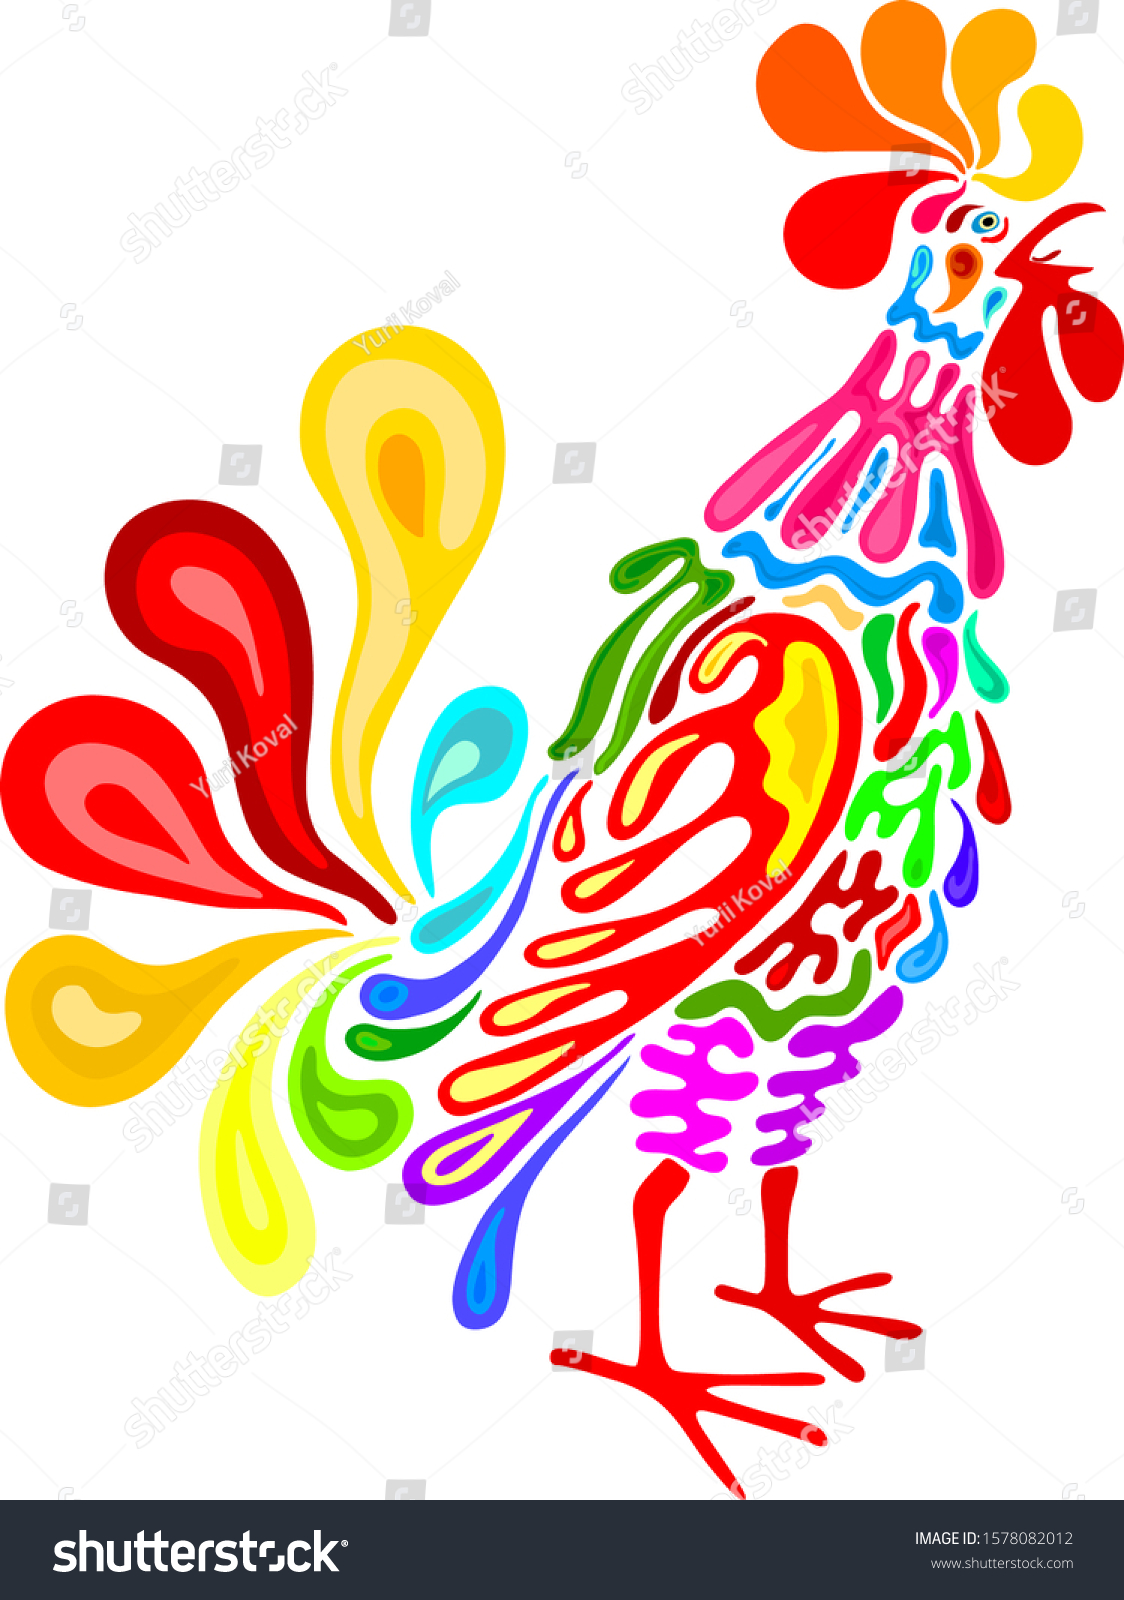 SVG of Сolorful rooster welcomes the morning sun. Сrow. Cock-a-doodle-doo! Decorative vector drawing. svg